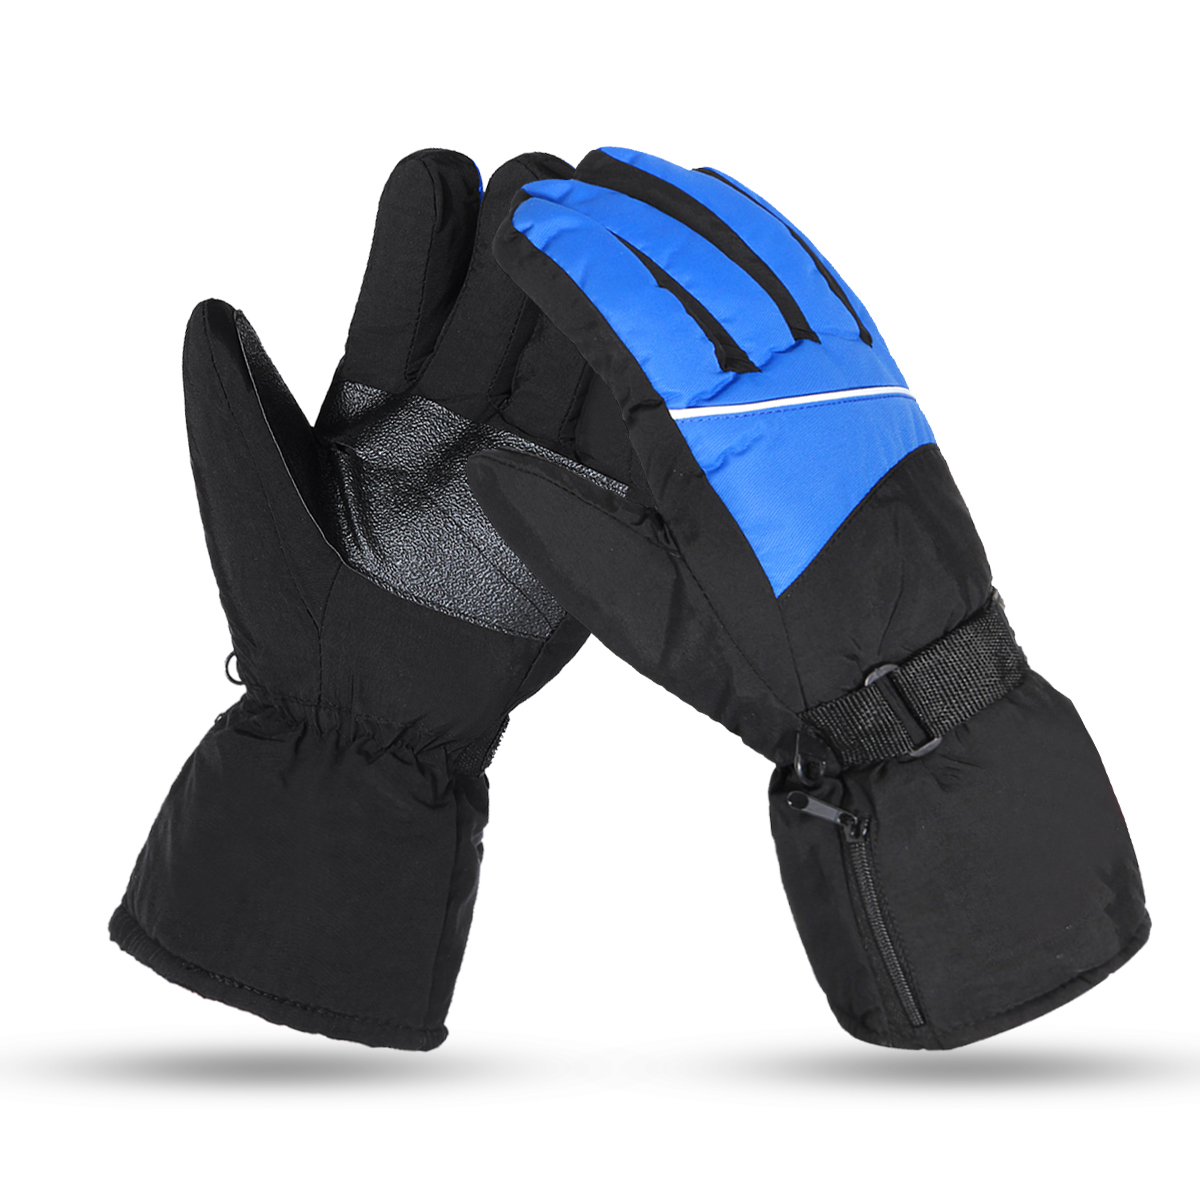 5000mah Electric Heated Gloves Motorcycle Winter Warmer Outdoor Skiing